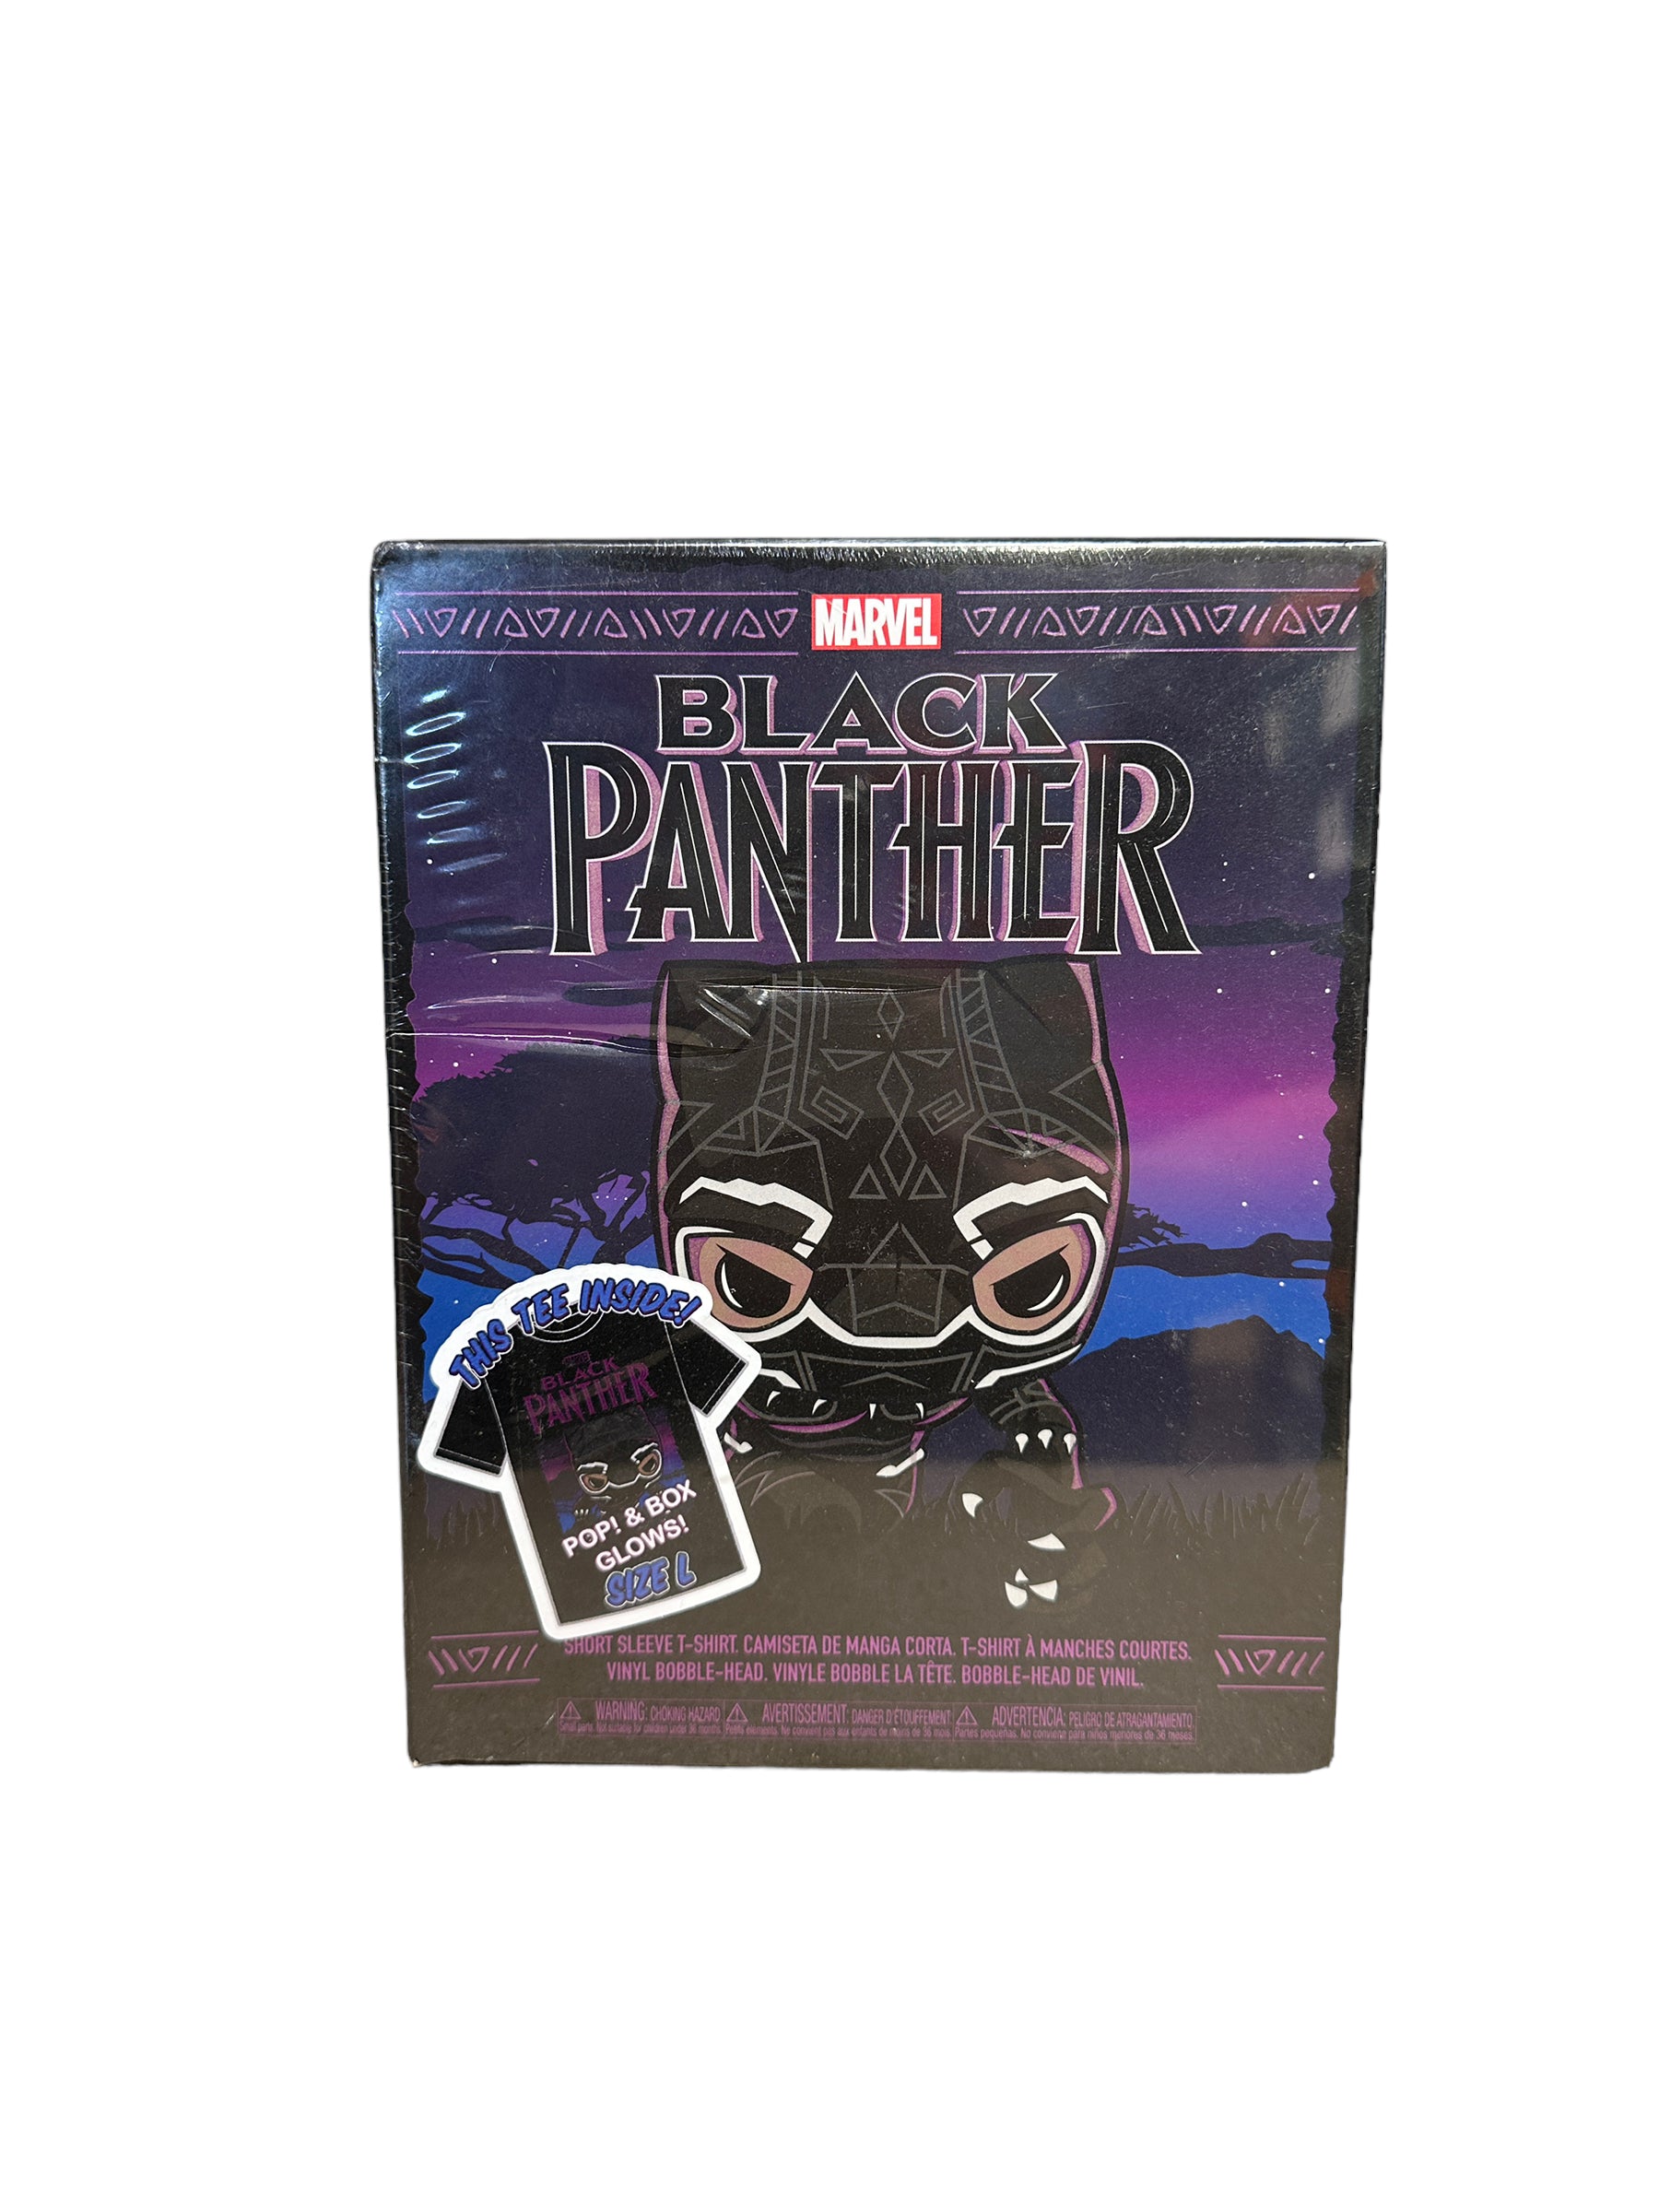 Black Panther #273 (Purple Glows in the Dark) Funko Pop T-Shirt Bundle! - Black Panther - Target Exclusive - Sealed - Condition 8.5/10